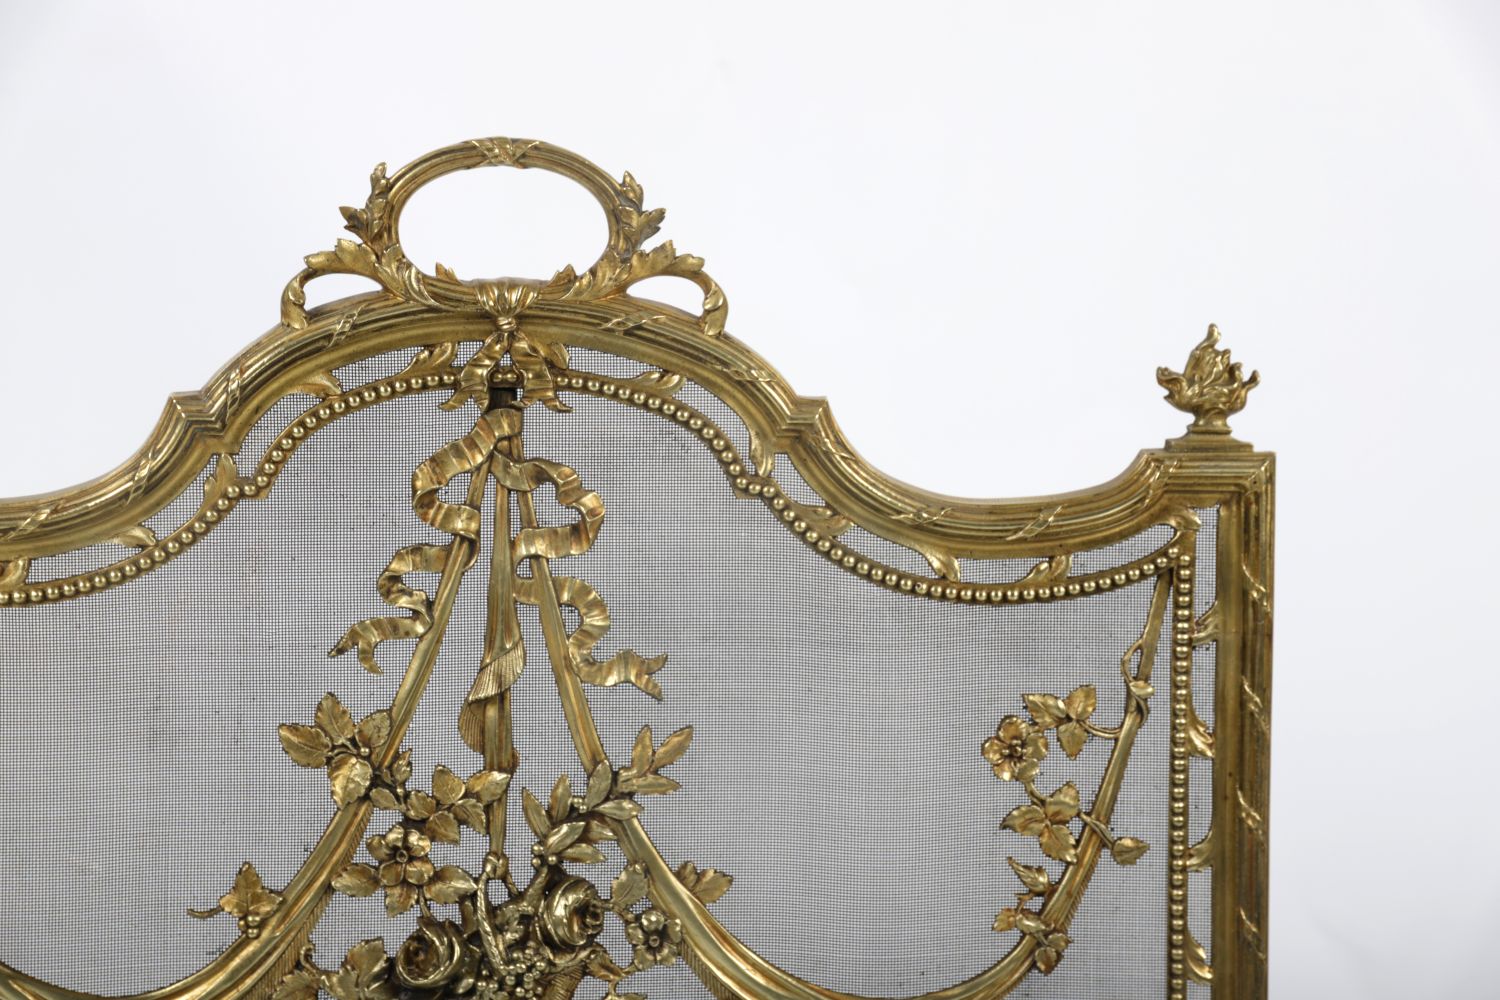 19TH-CENTURY FRENCH ORMOLU FIRE SCREEN - Image 2 of 2